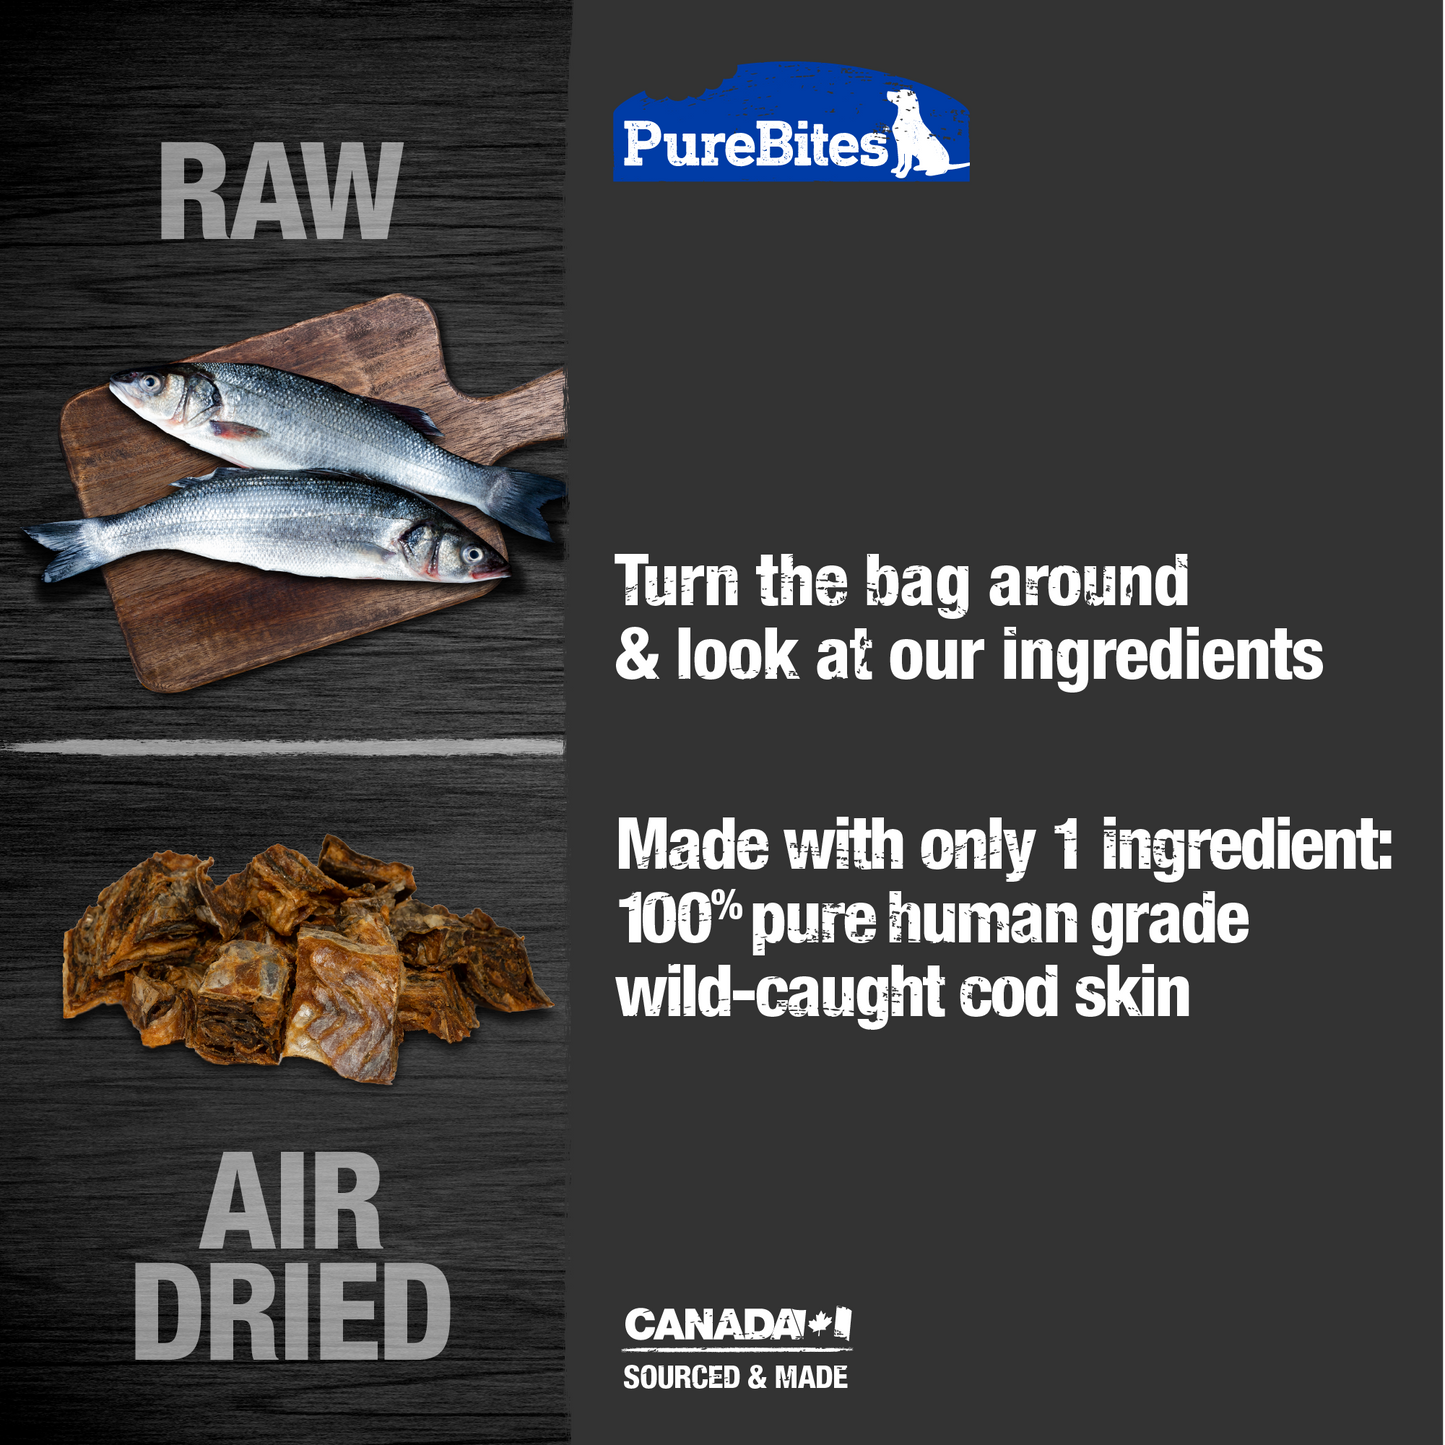 Made with only 1 Ingredient you can read, pronounce, and trust: Canadian sourced human grade wild-caught cod skin.